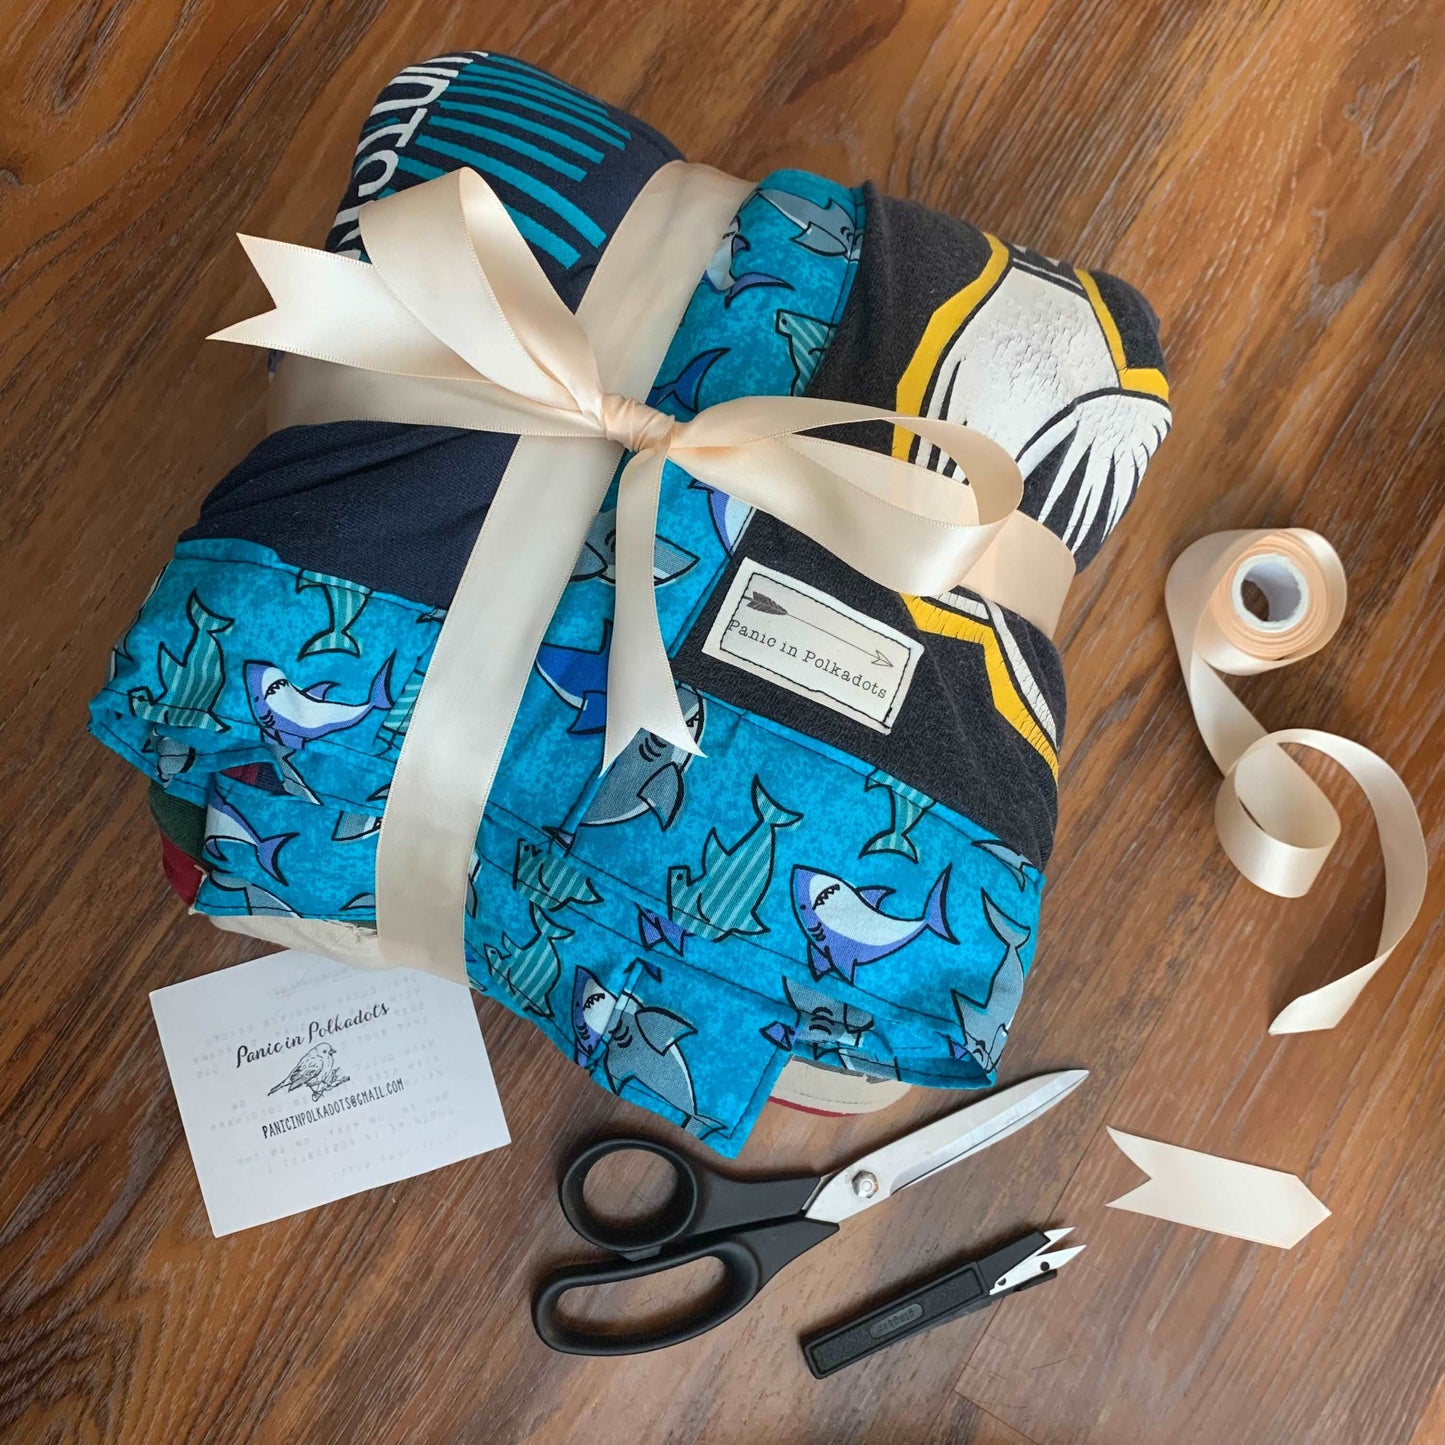 a custom tshirt quilt, with blue shark border, all folded up and wrapped up with a ribbon. A pair of gingham scissors, and snips, and a card with Panic in Polkadots, are in view